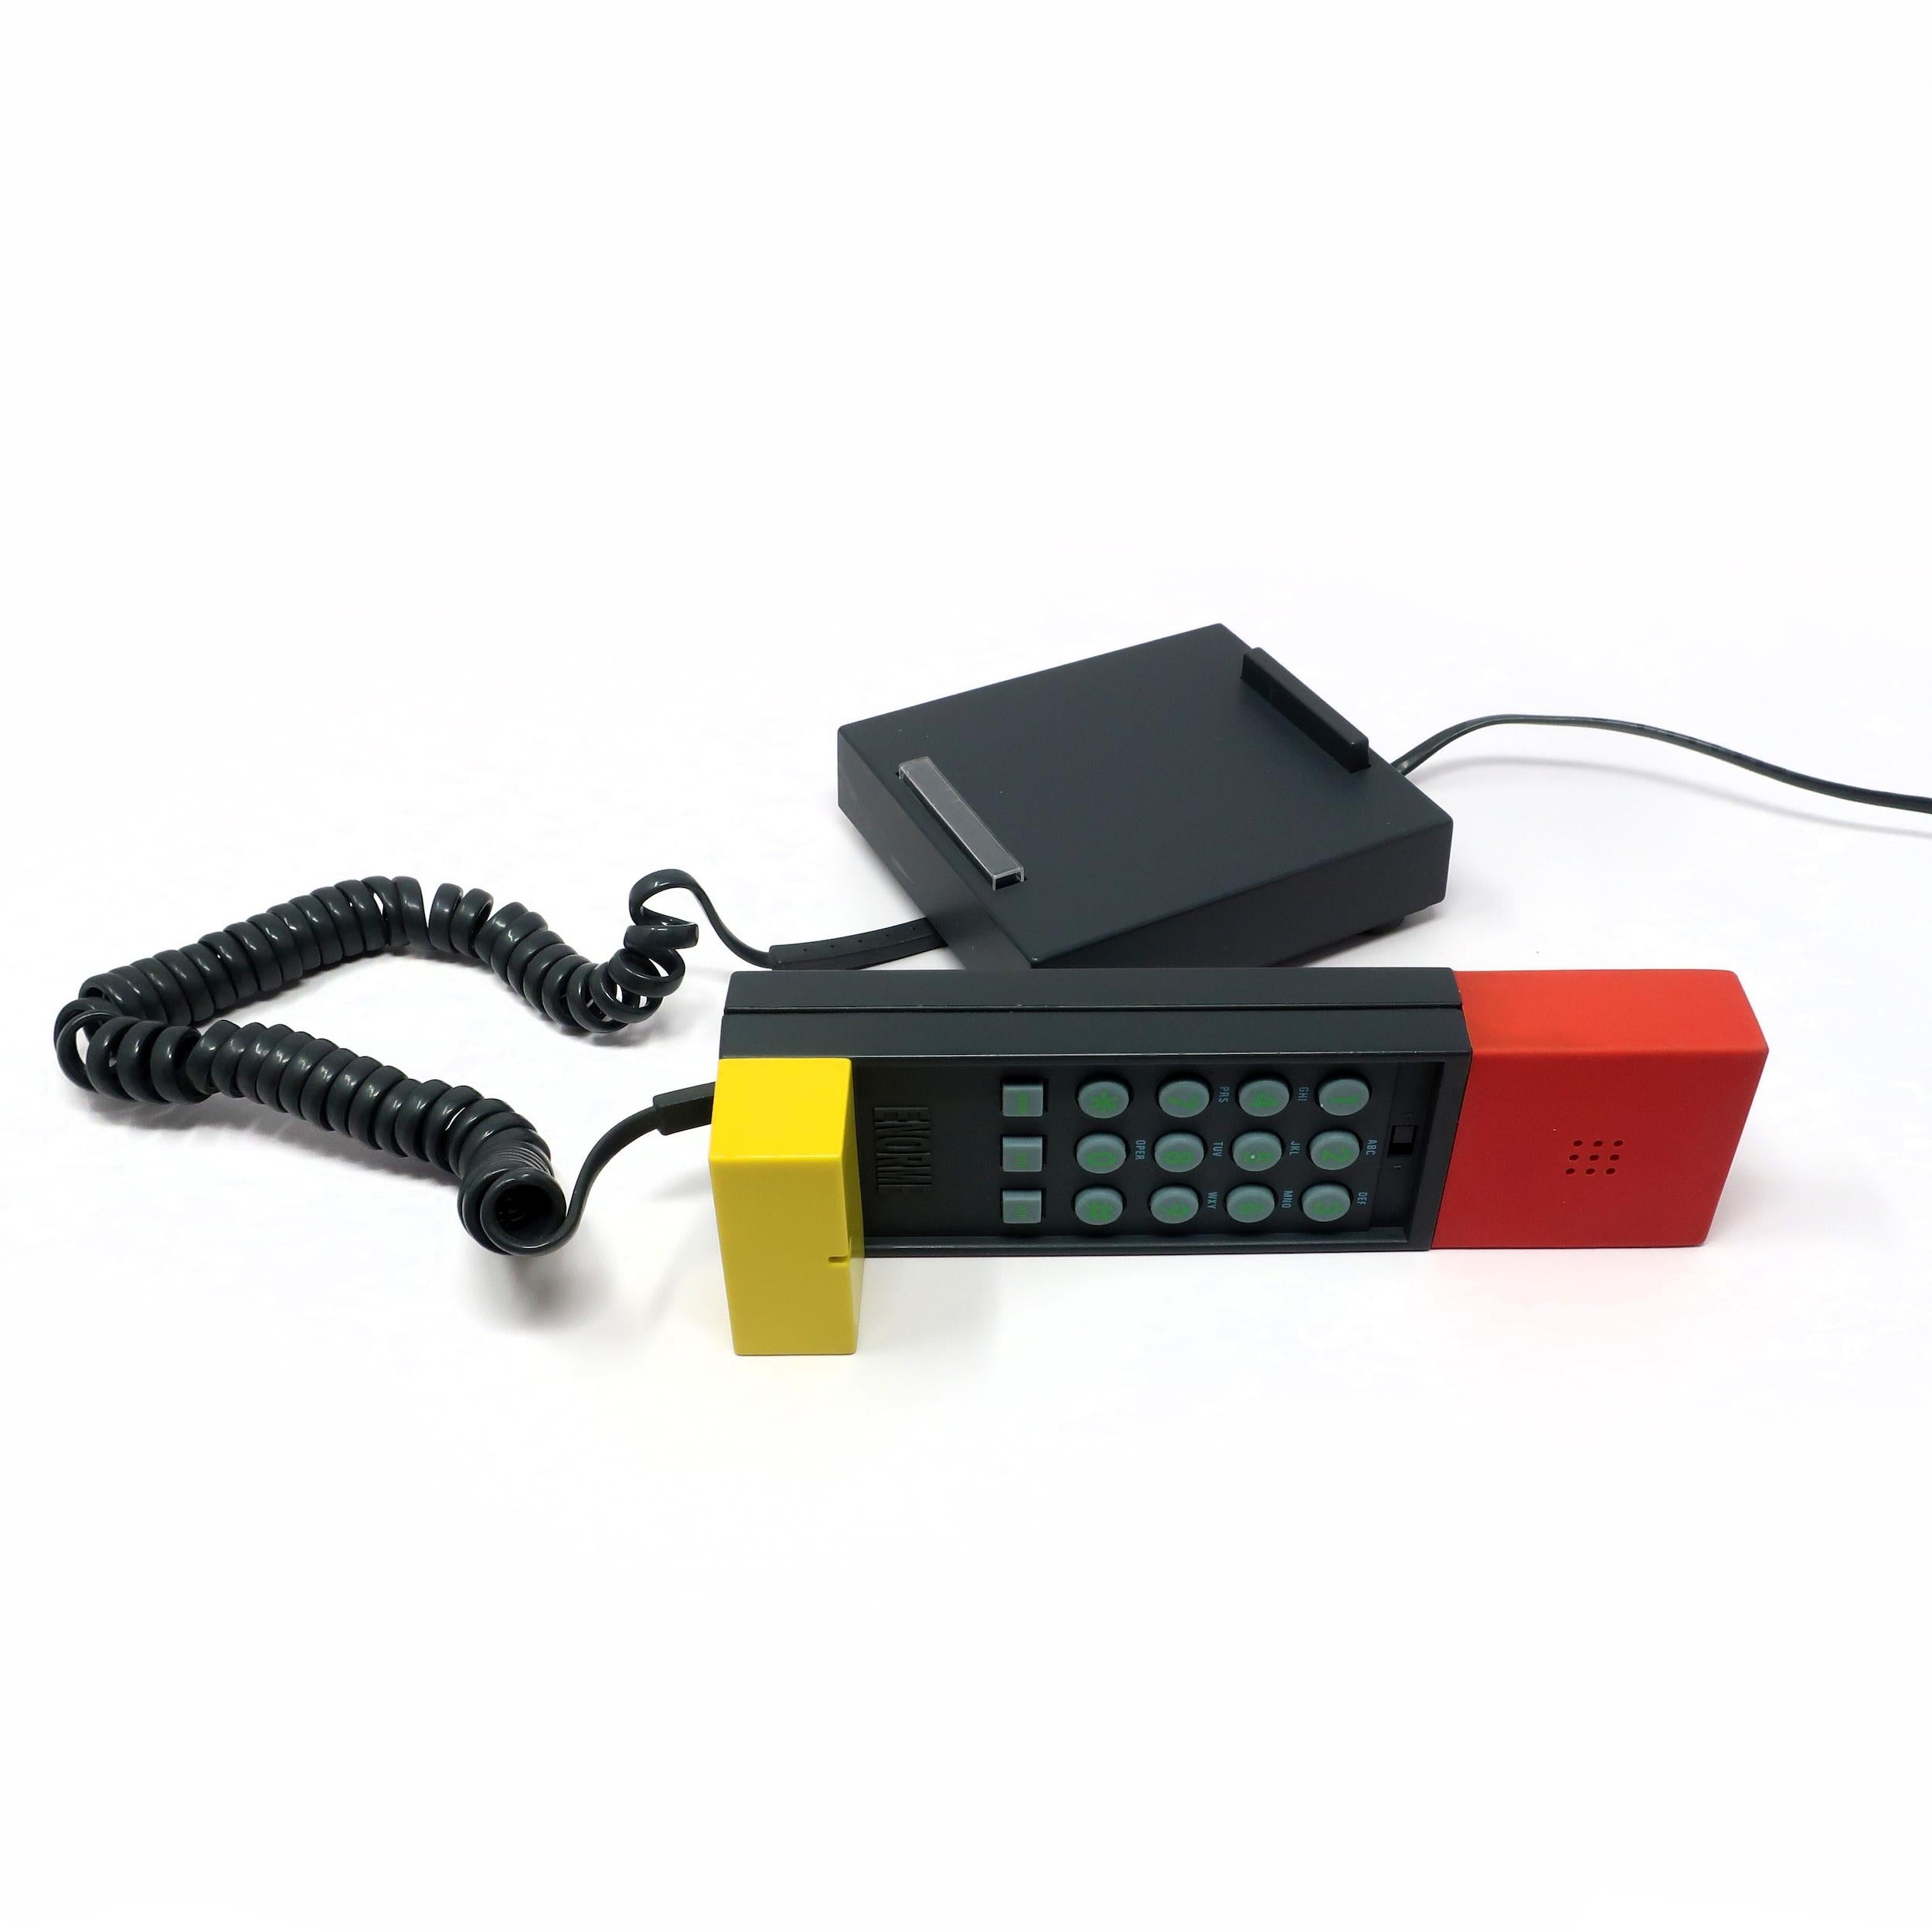 1986 Enorme Telephone by Ettore Sottsass for Enorme	 In Good Condition For Sale In Brooklyn, NY